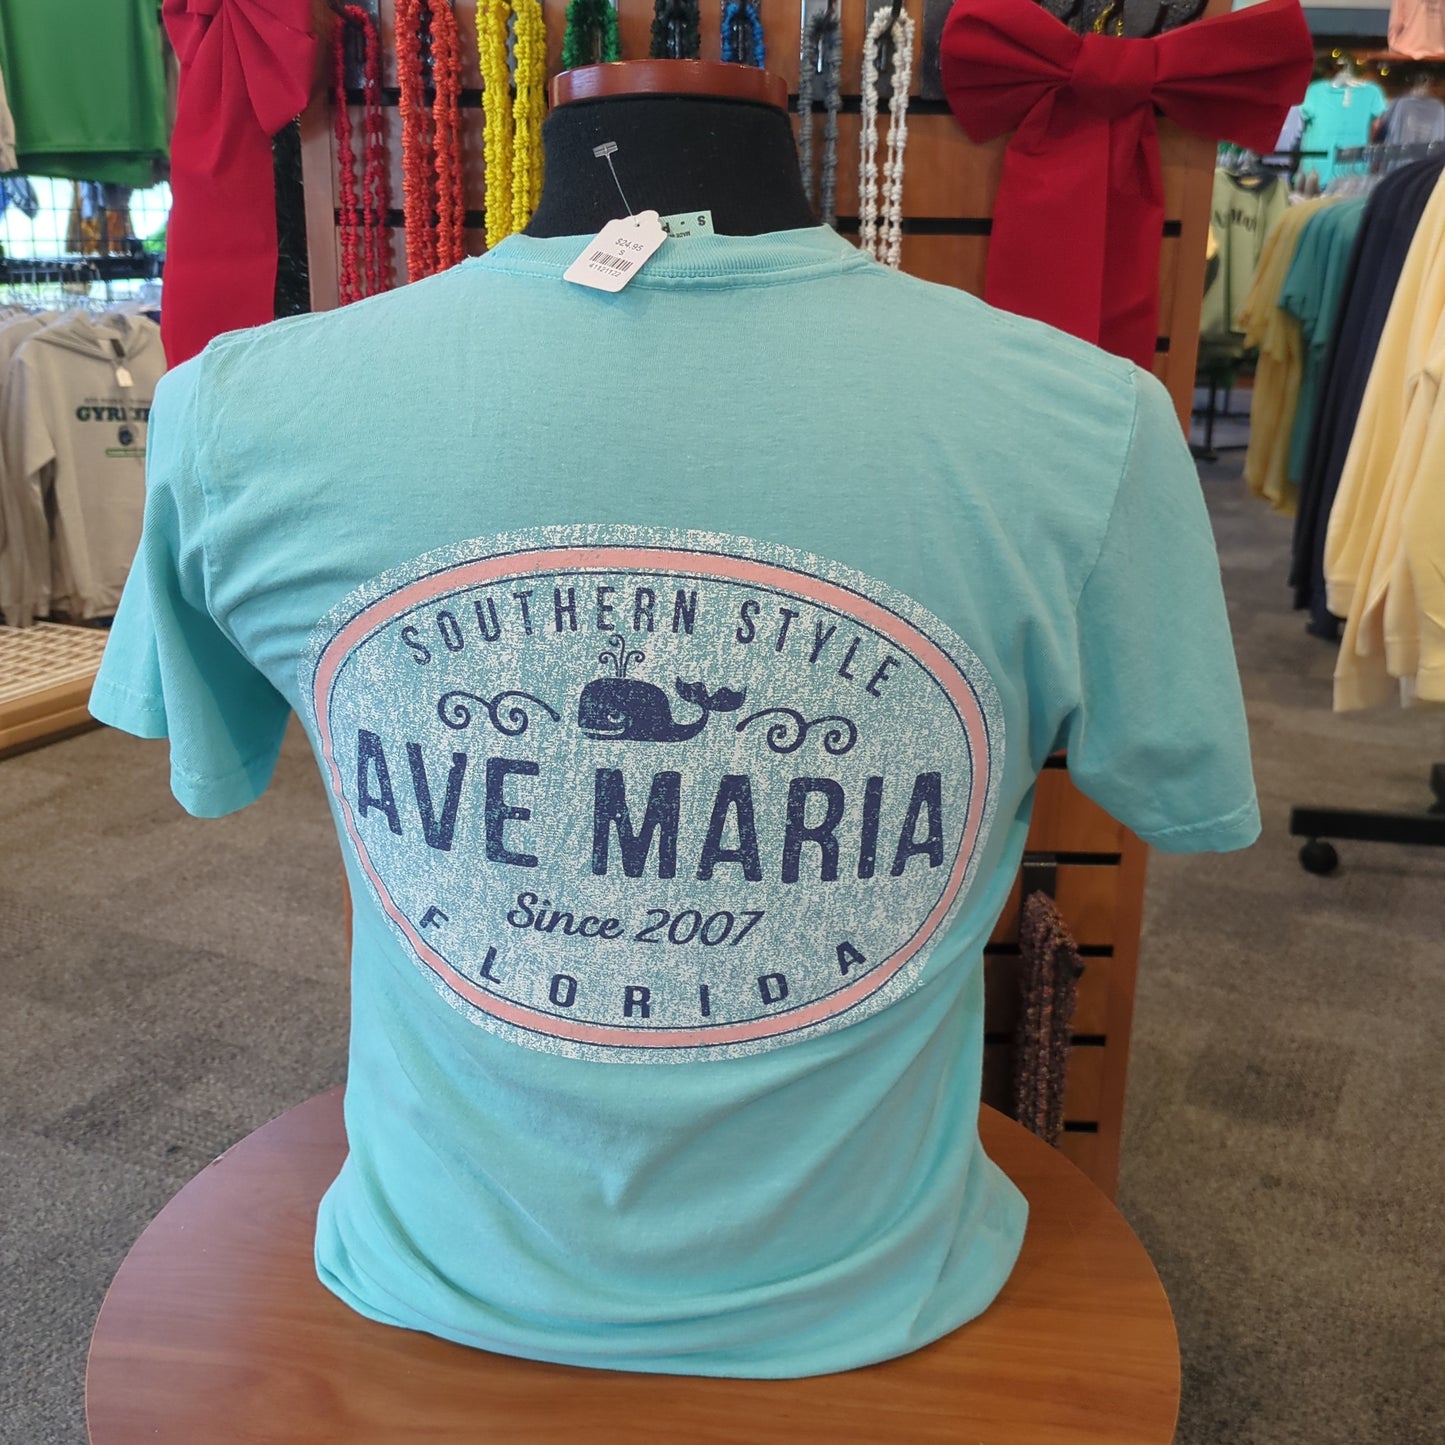 Southern Style -  Ave Maria Florida since 2007 tee